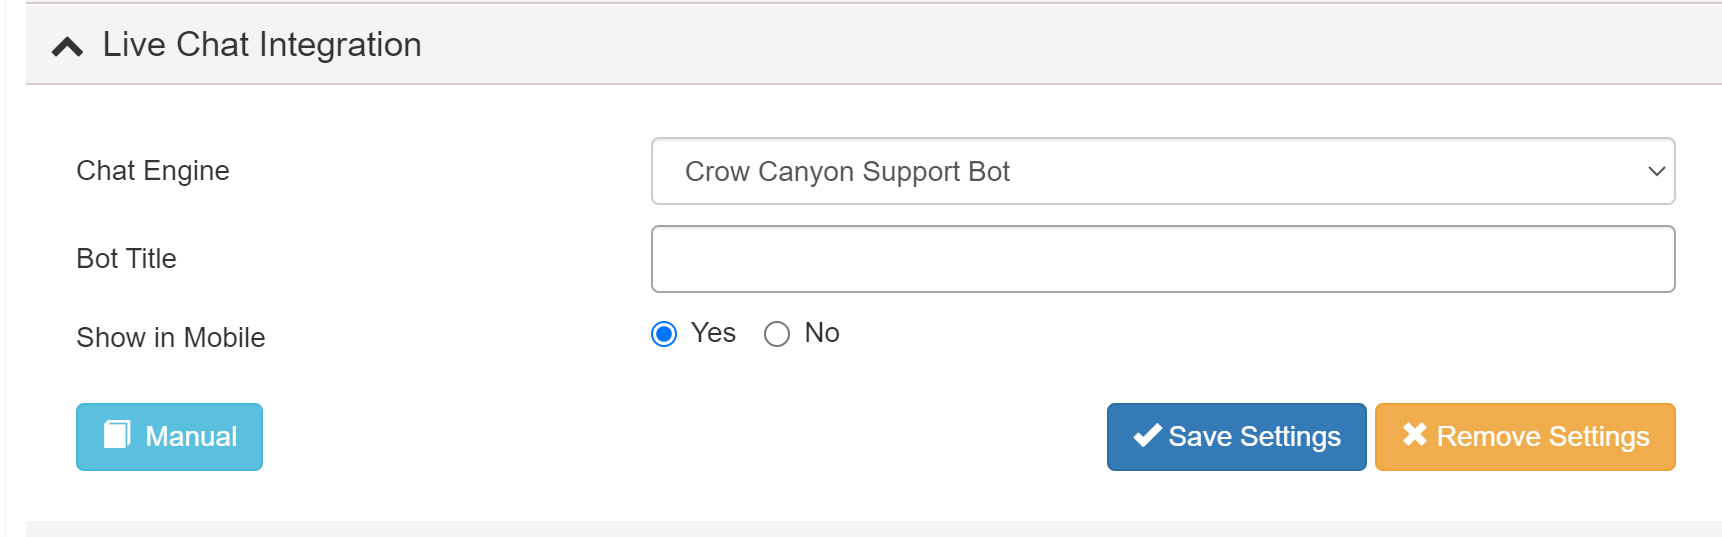 Crow canyon bot in live chat